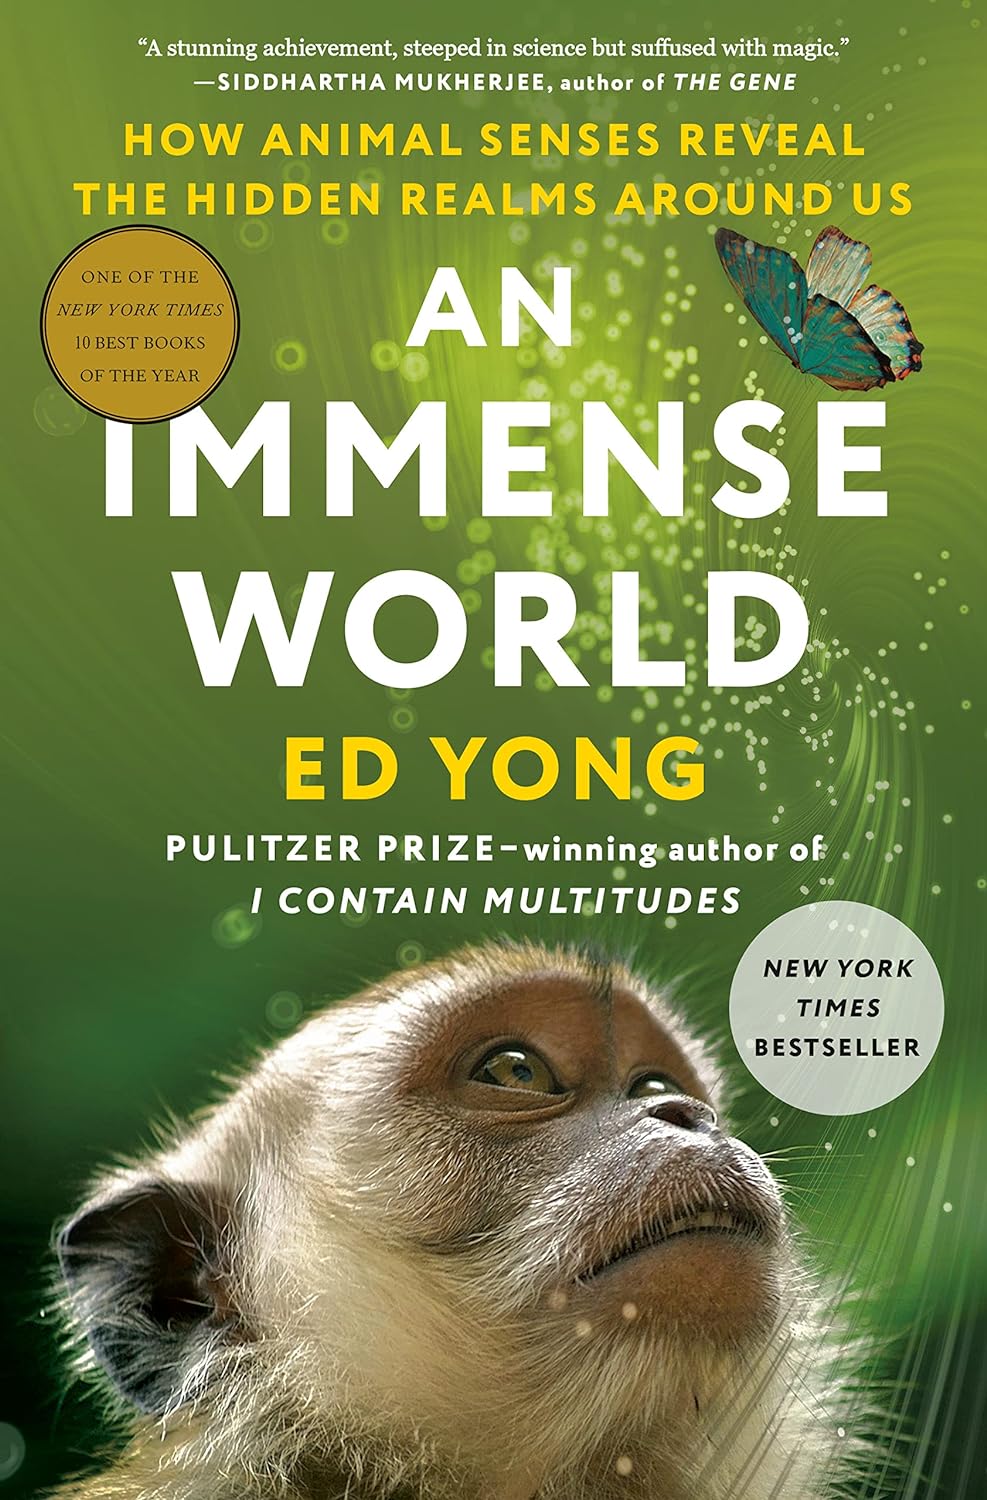 Image for "An Immense World: How Animal Senses Reveal the Hidden Realms Around Us"